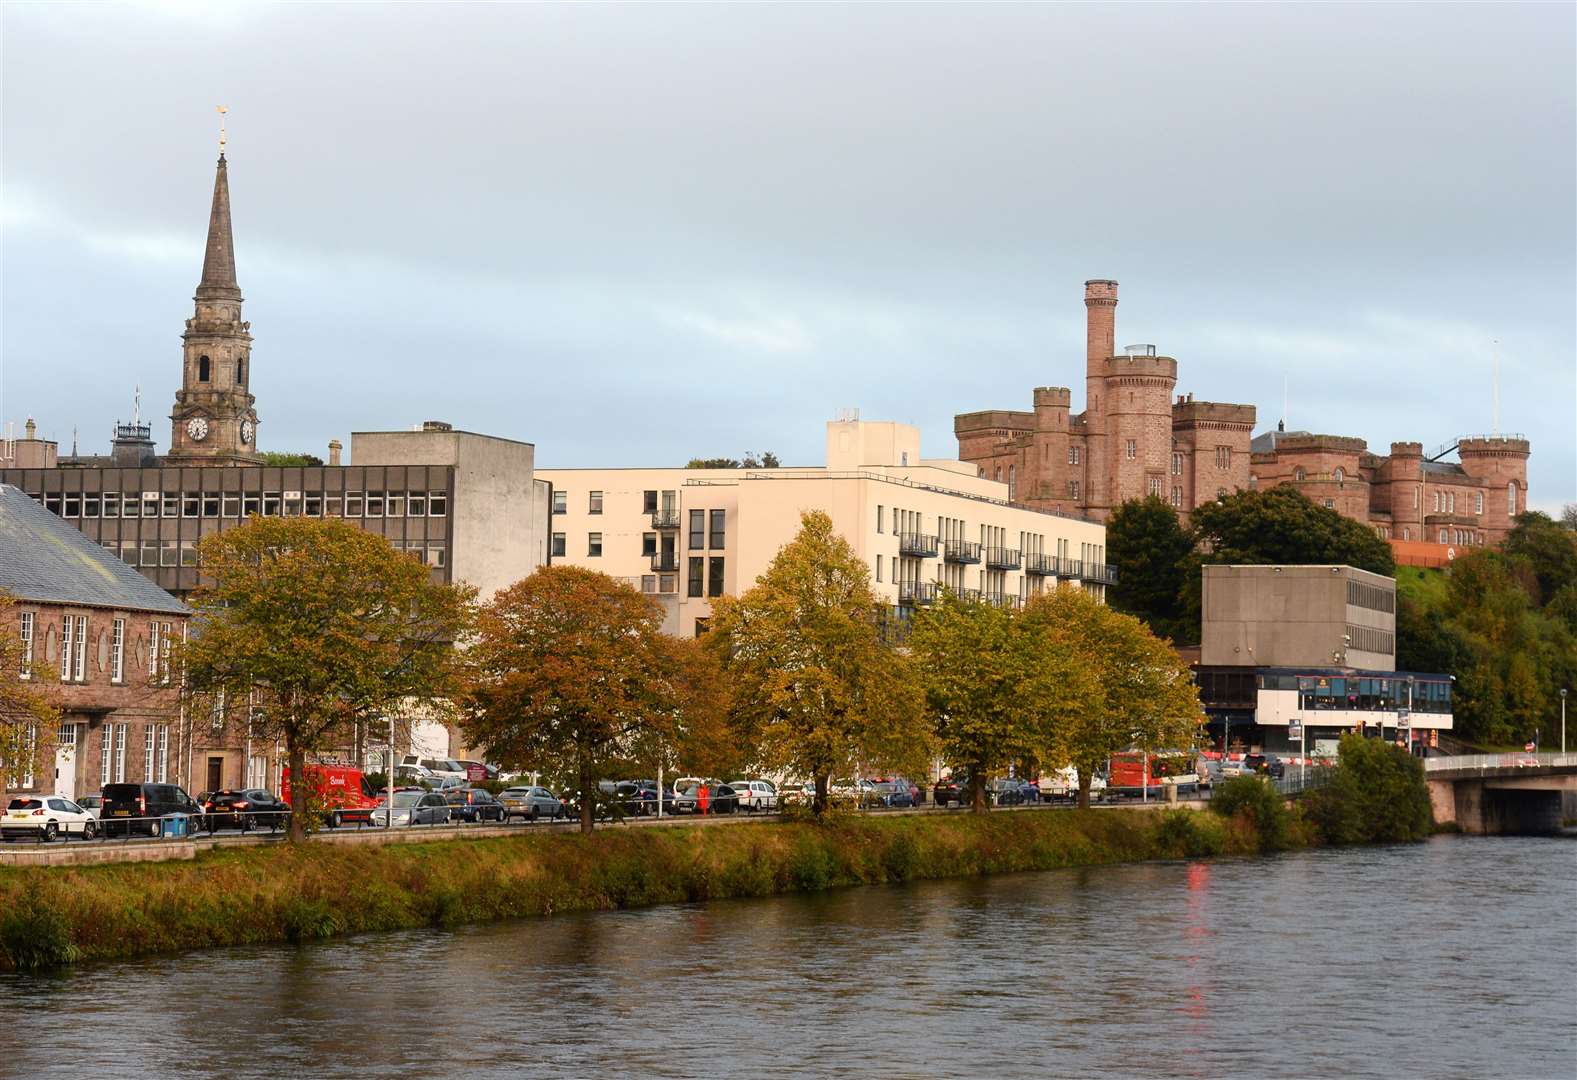 Inverness city centre and the River Ness which are seen as the focus of the strategy.